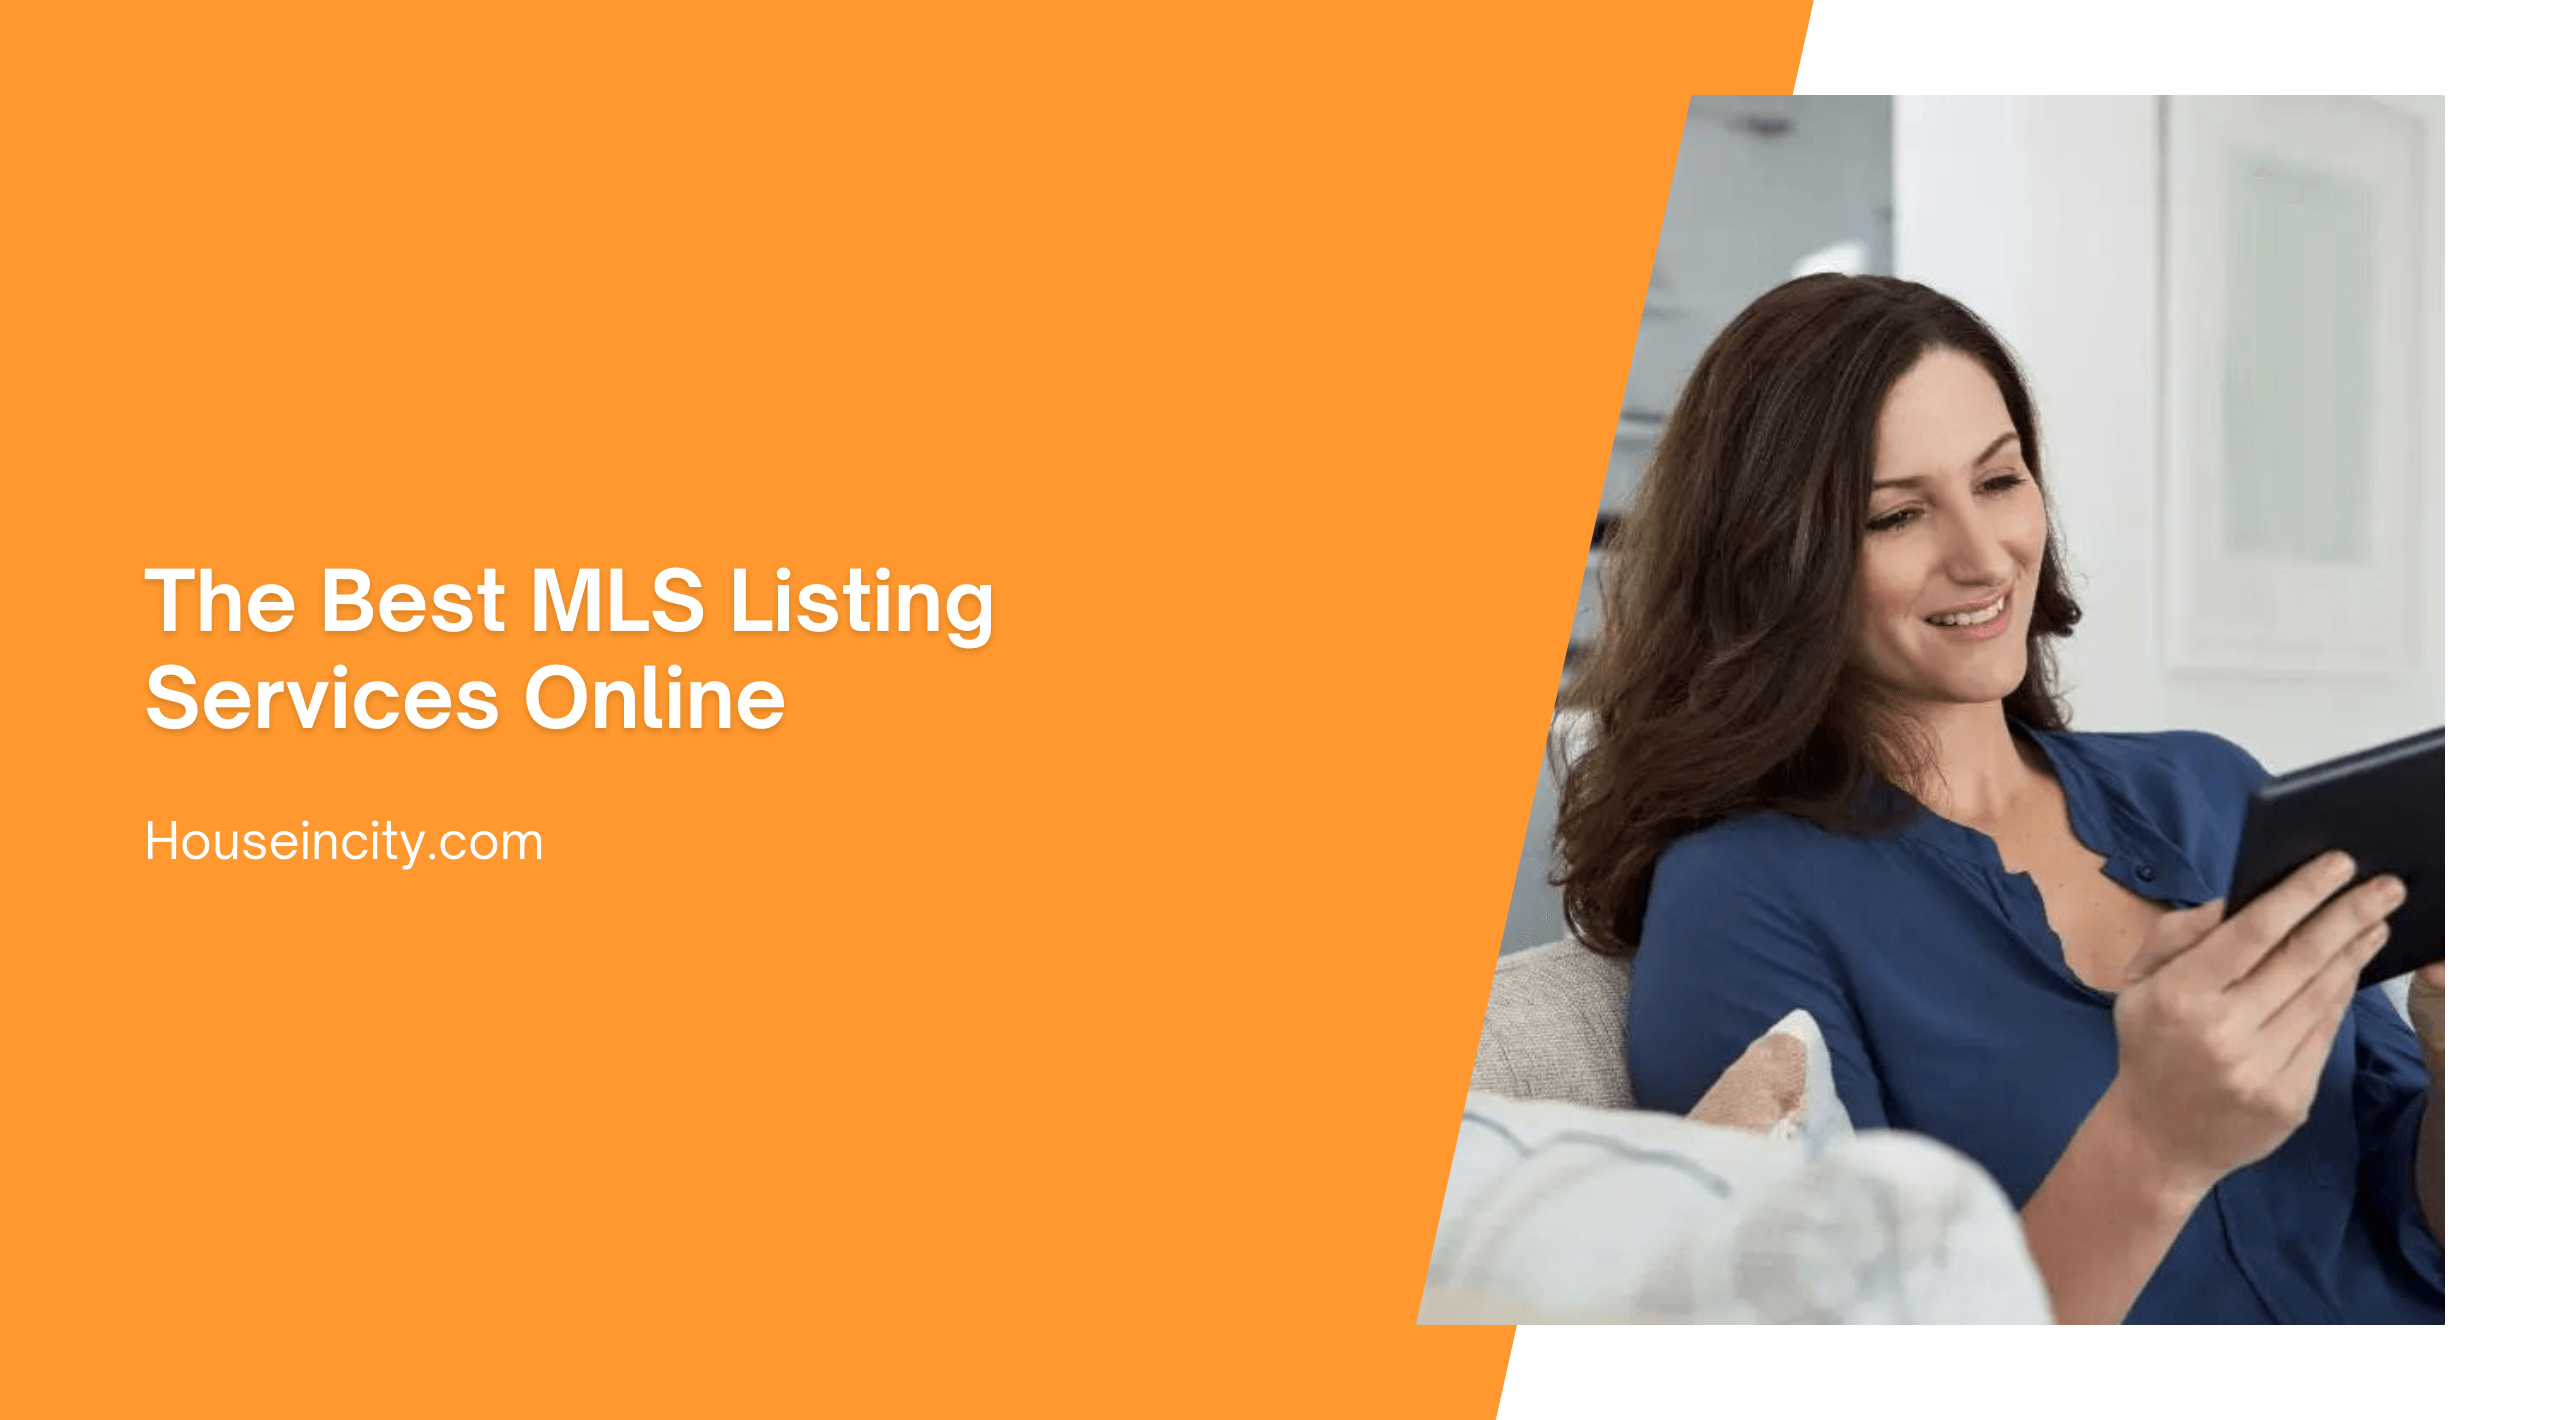 The Best MLS Listing Services Online